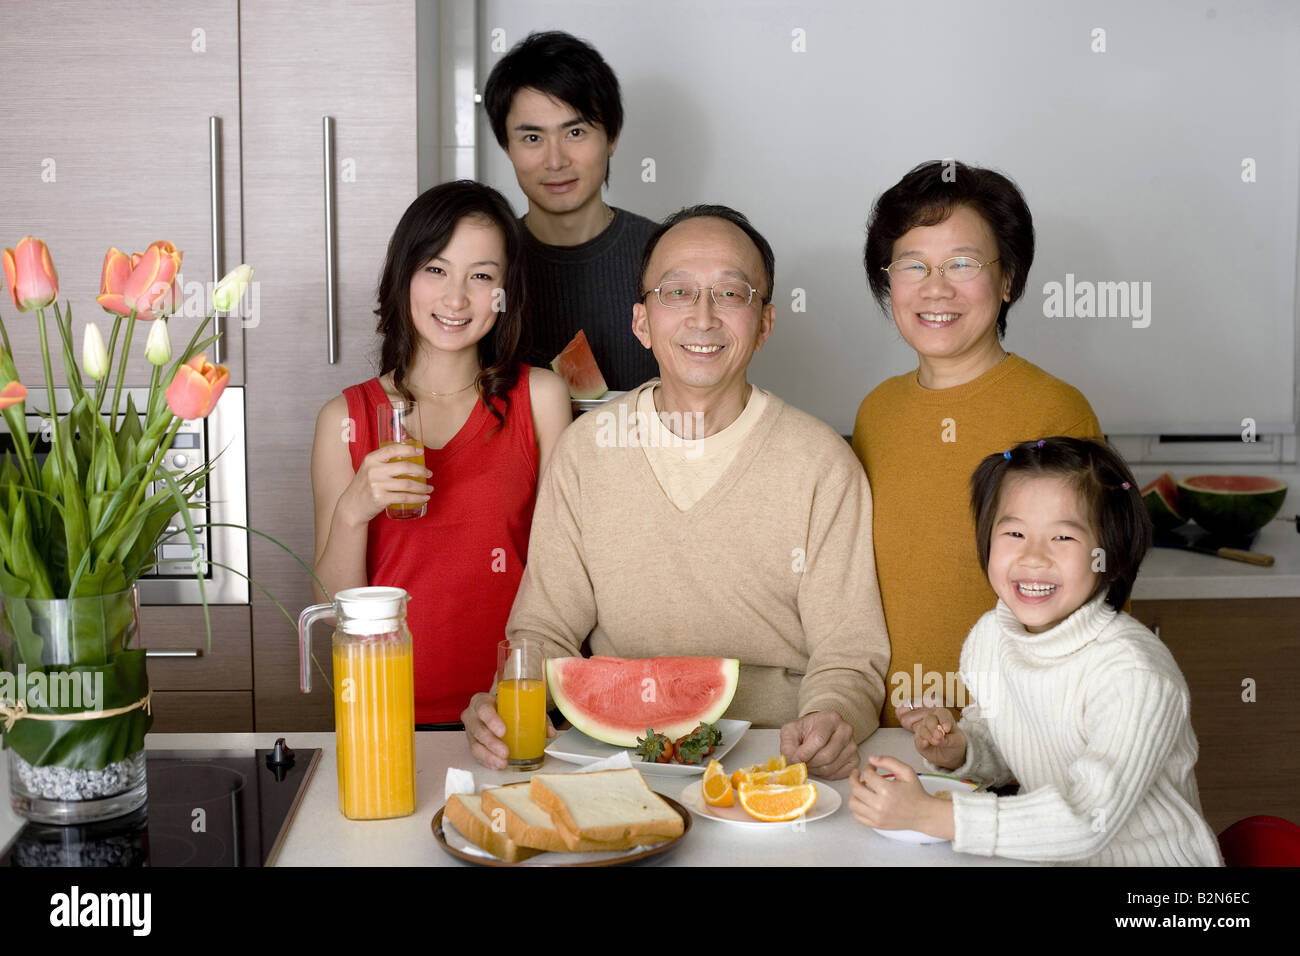 Portrait of a family gathered for breakfast in the kitchen Stock Photo